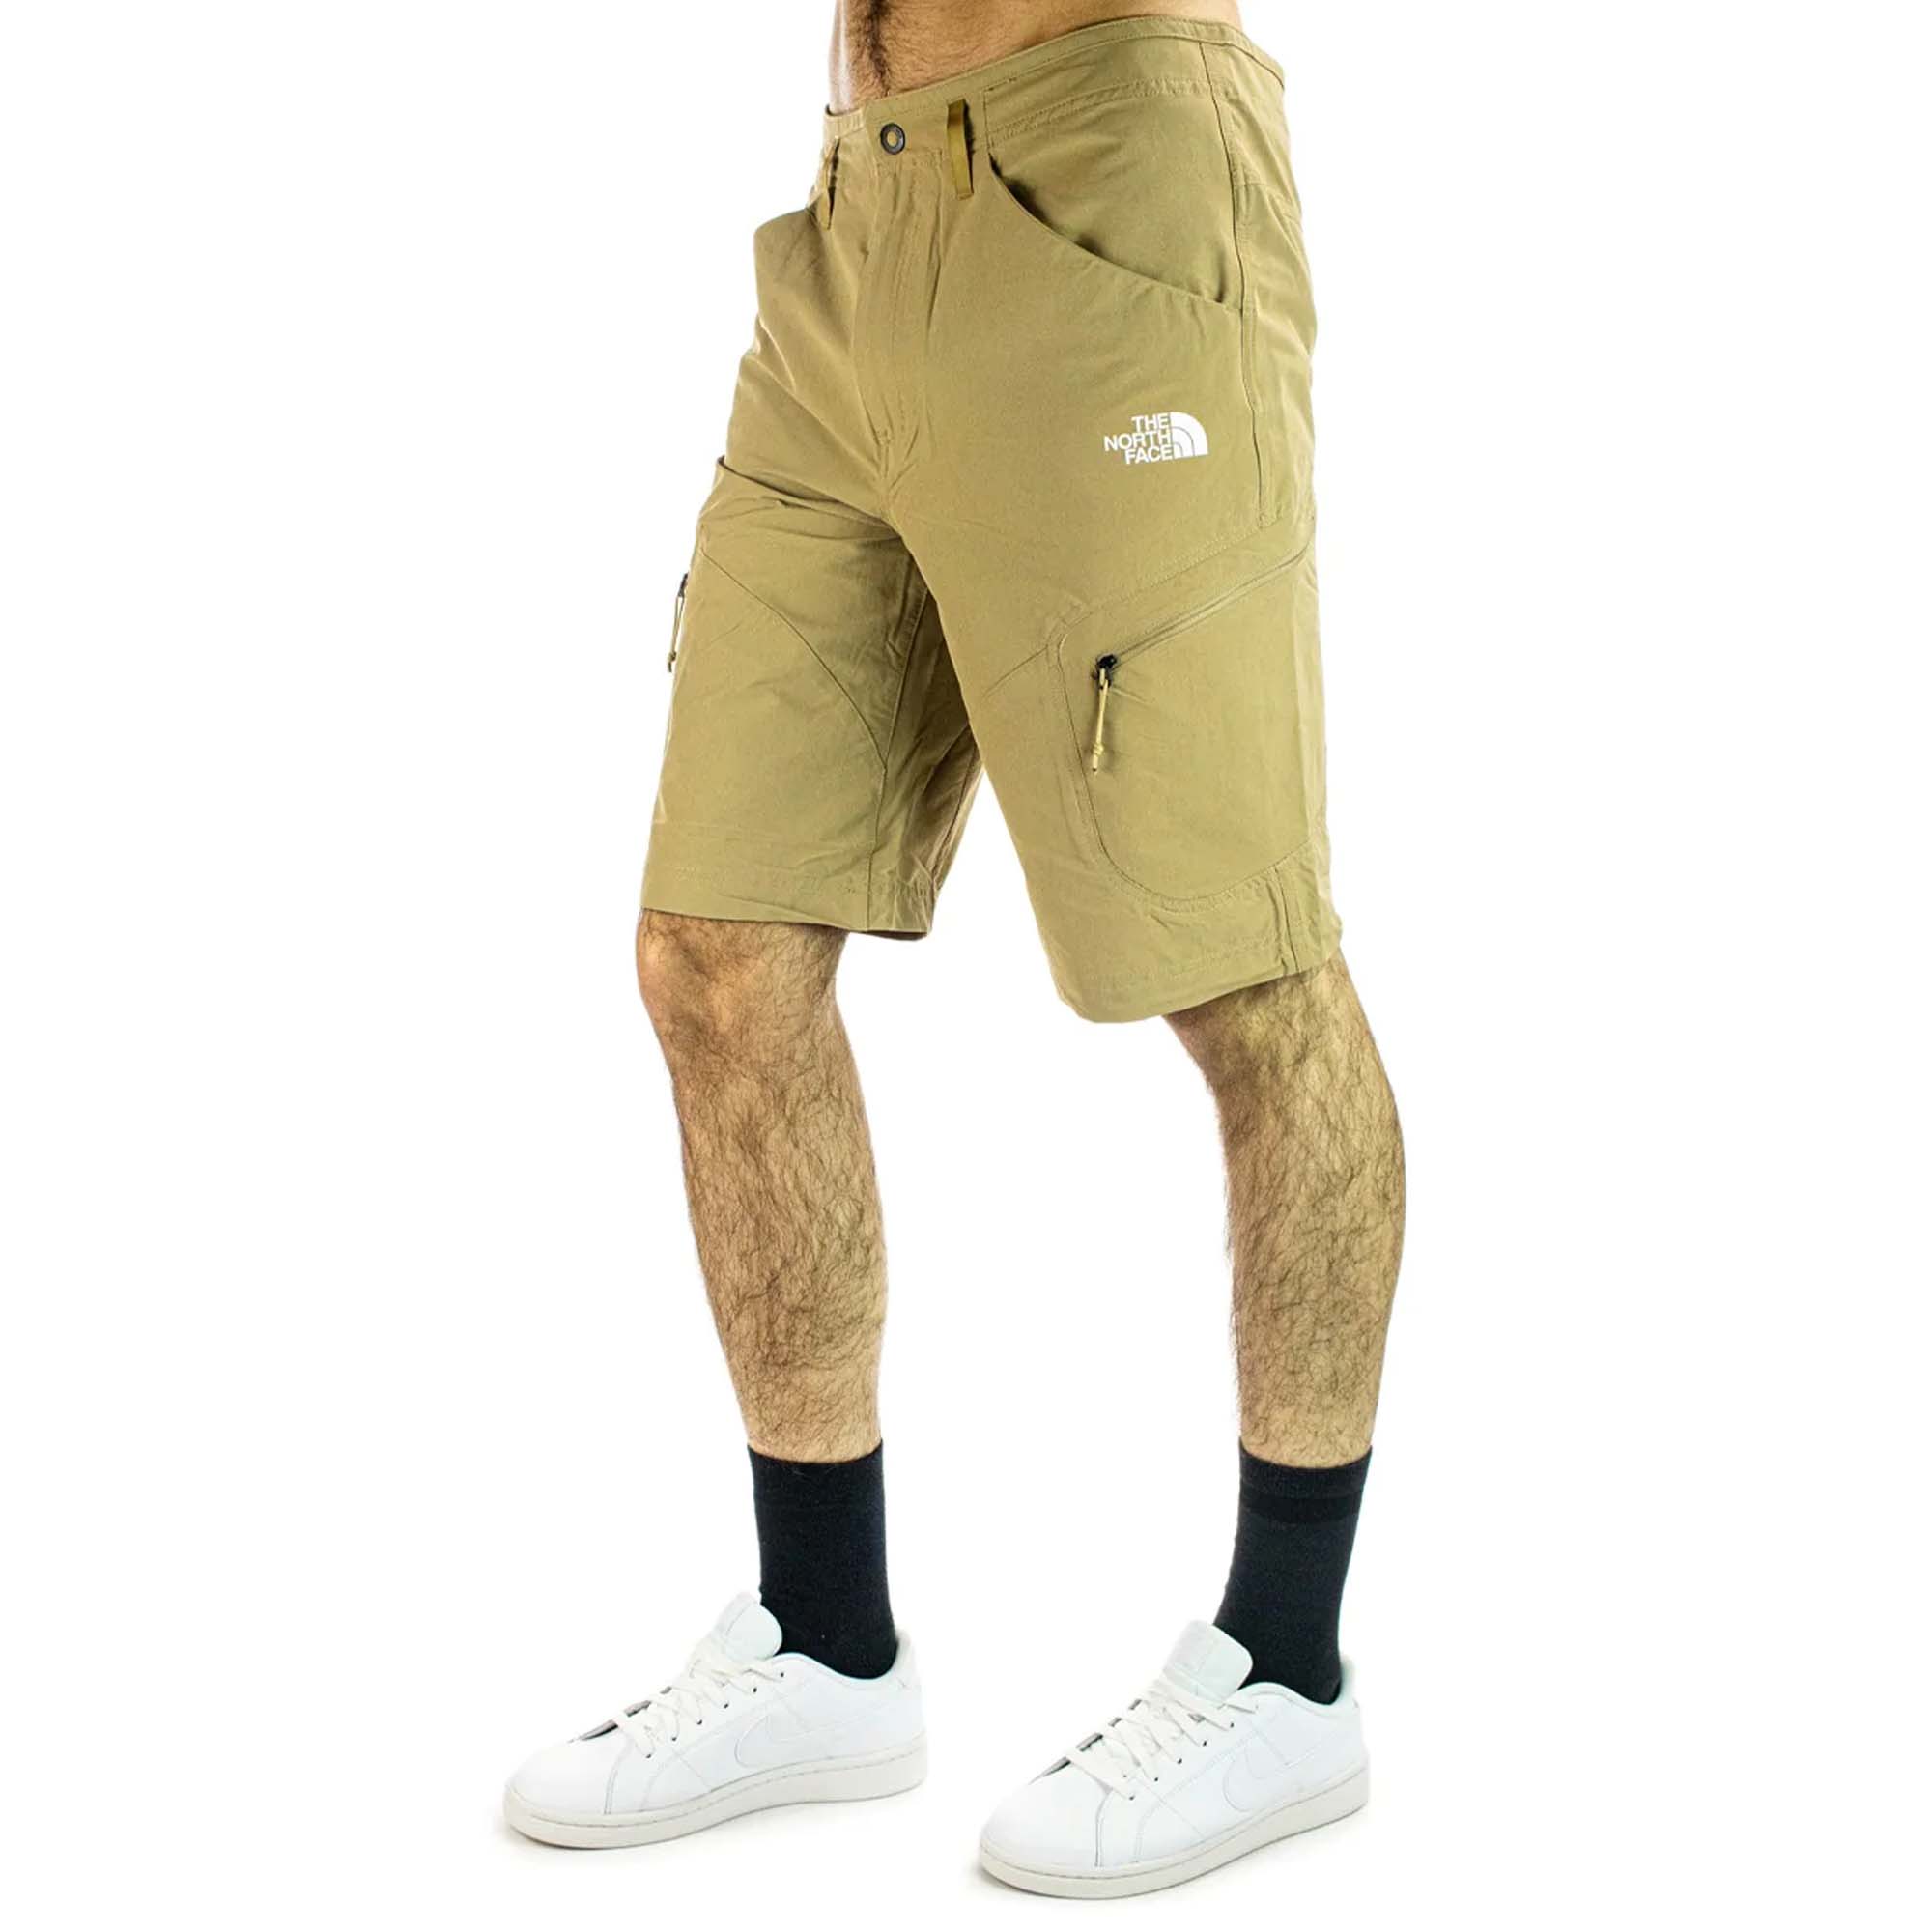 THE NORTH FACE m explo short